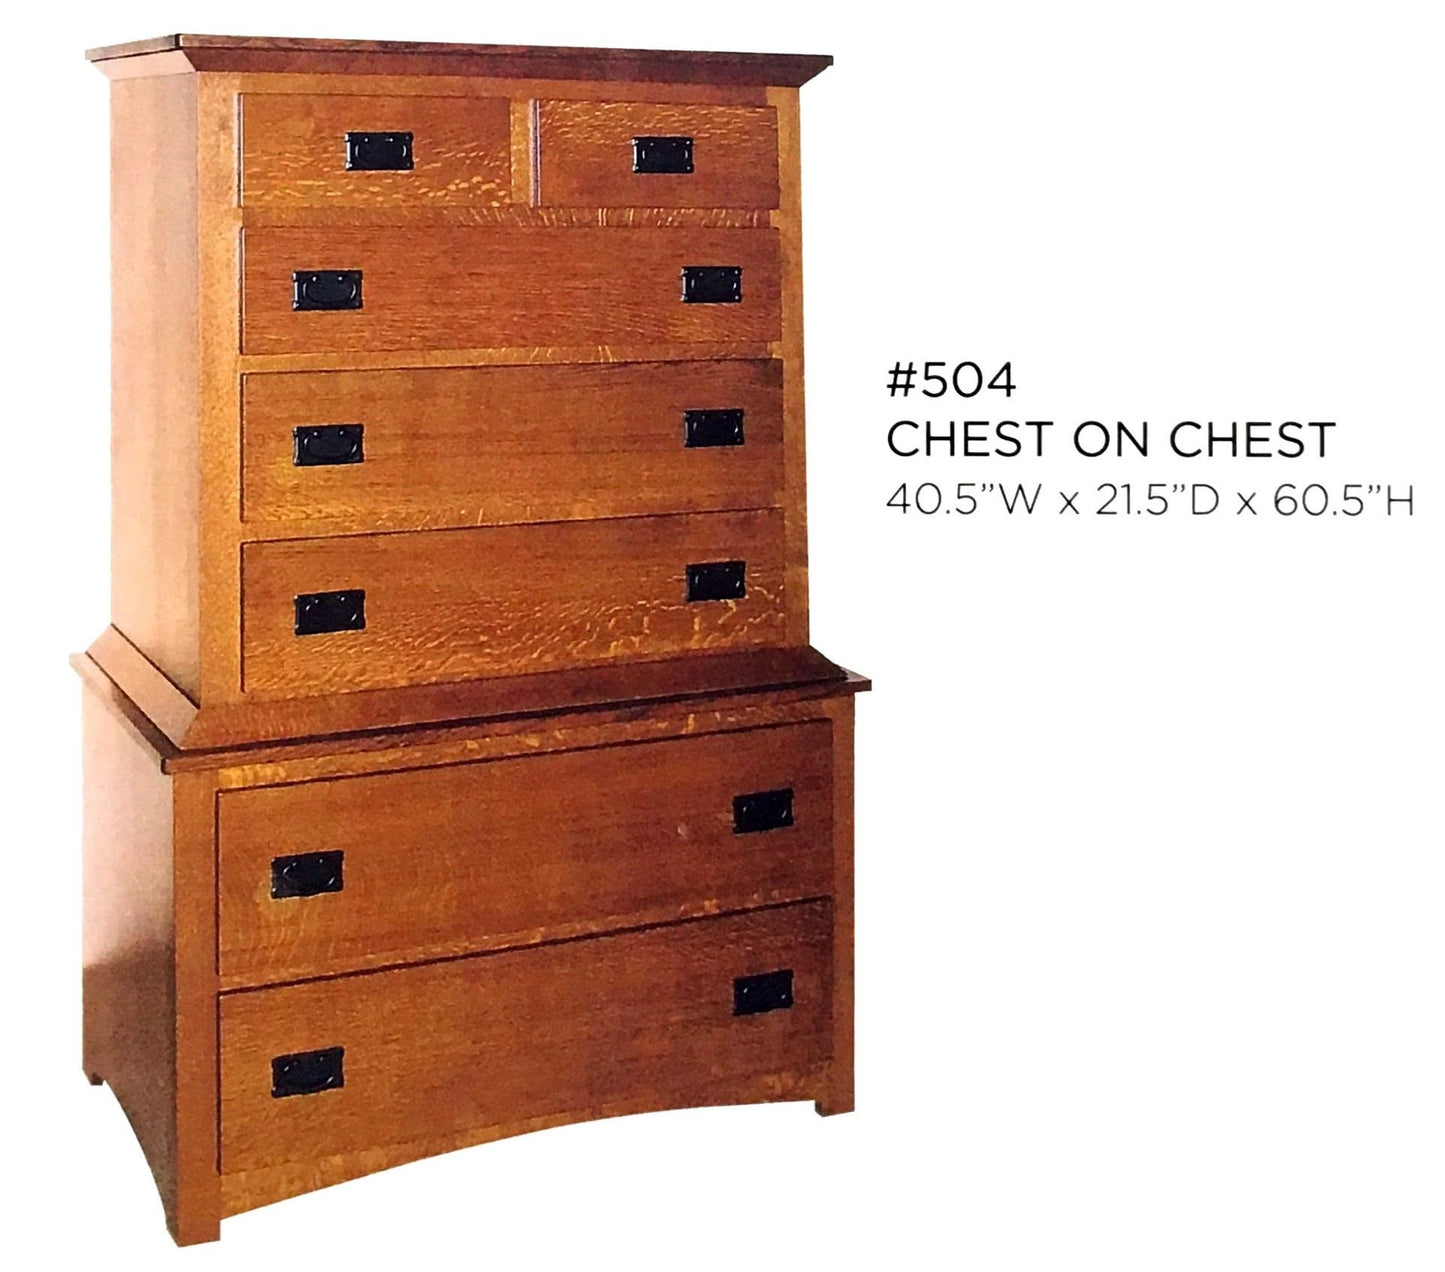 Mission Chest on Chest